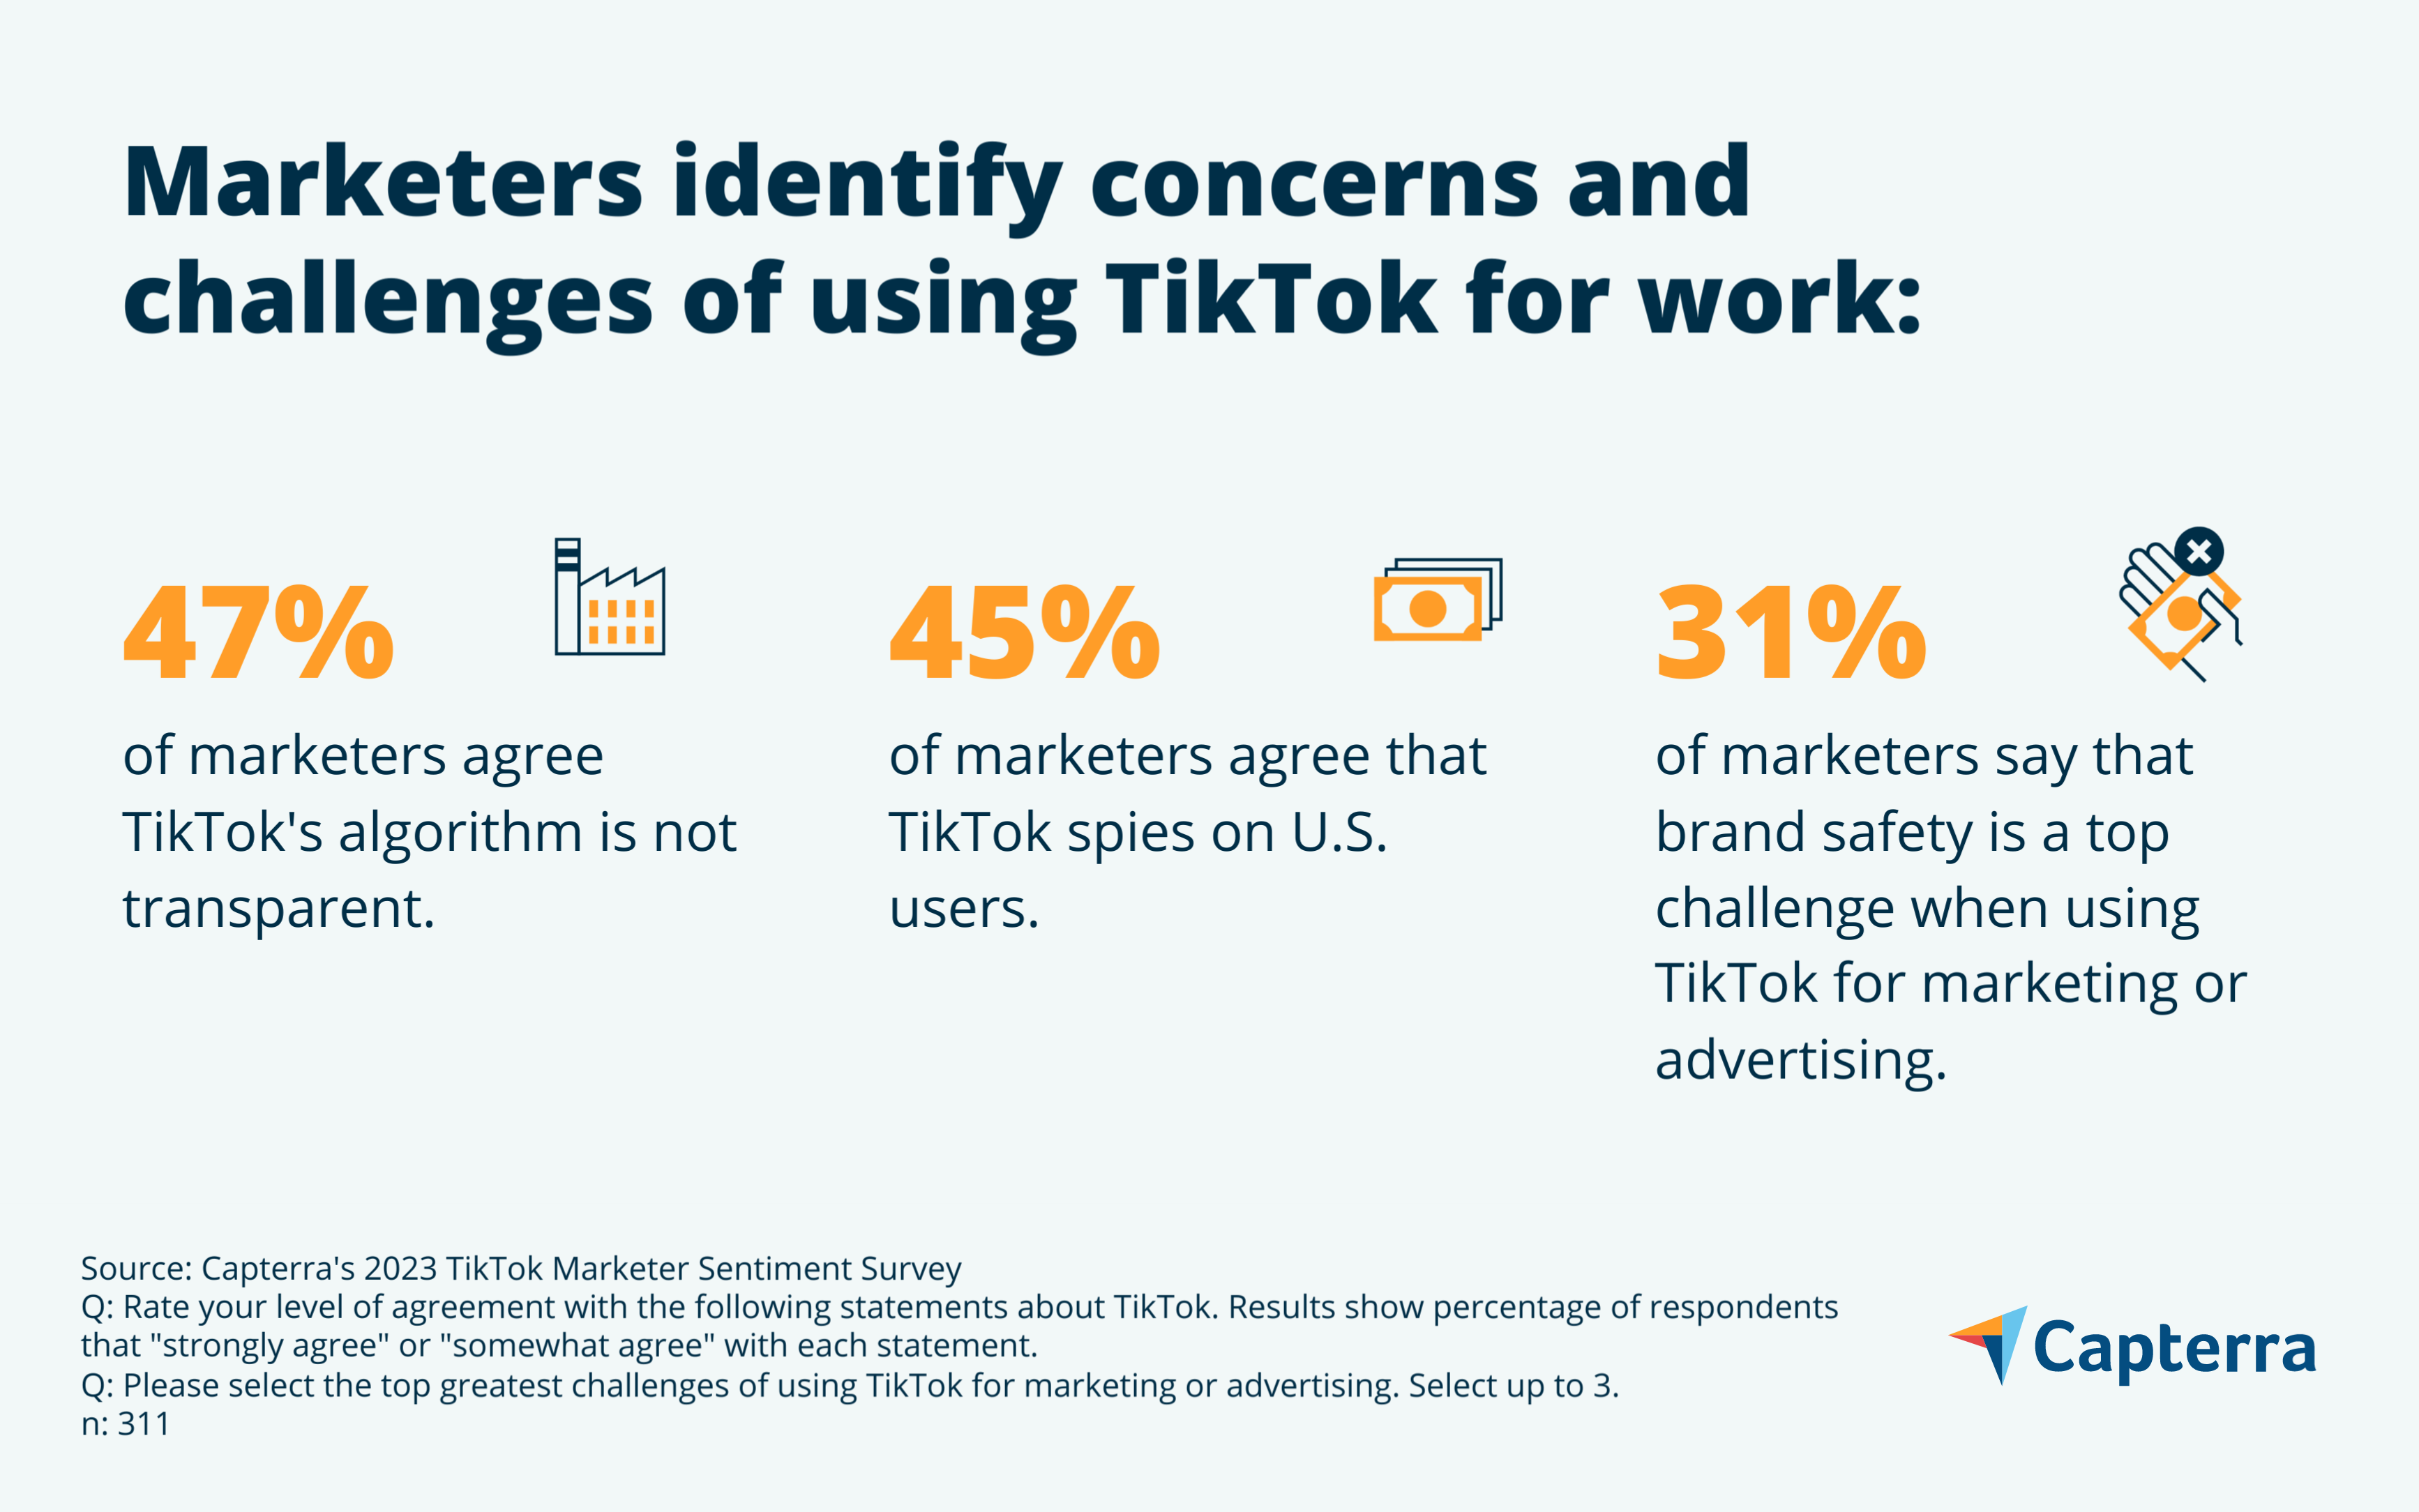 Is It Time for Marketers To Think Beyond TikTok?